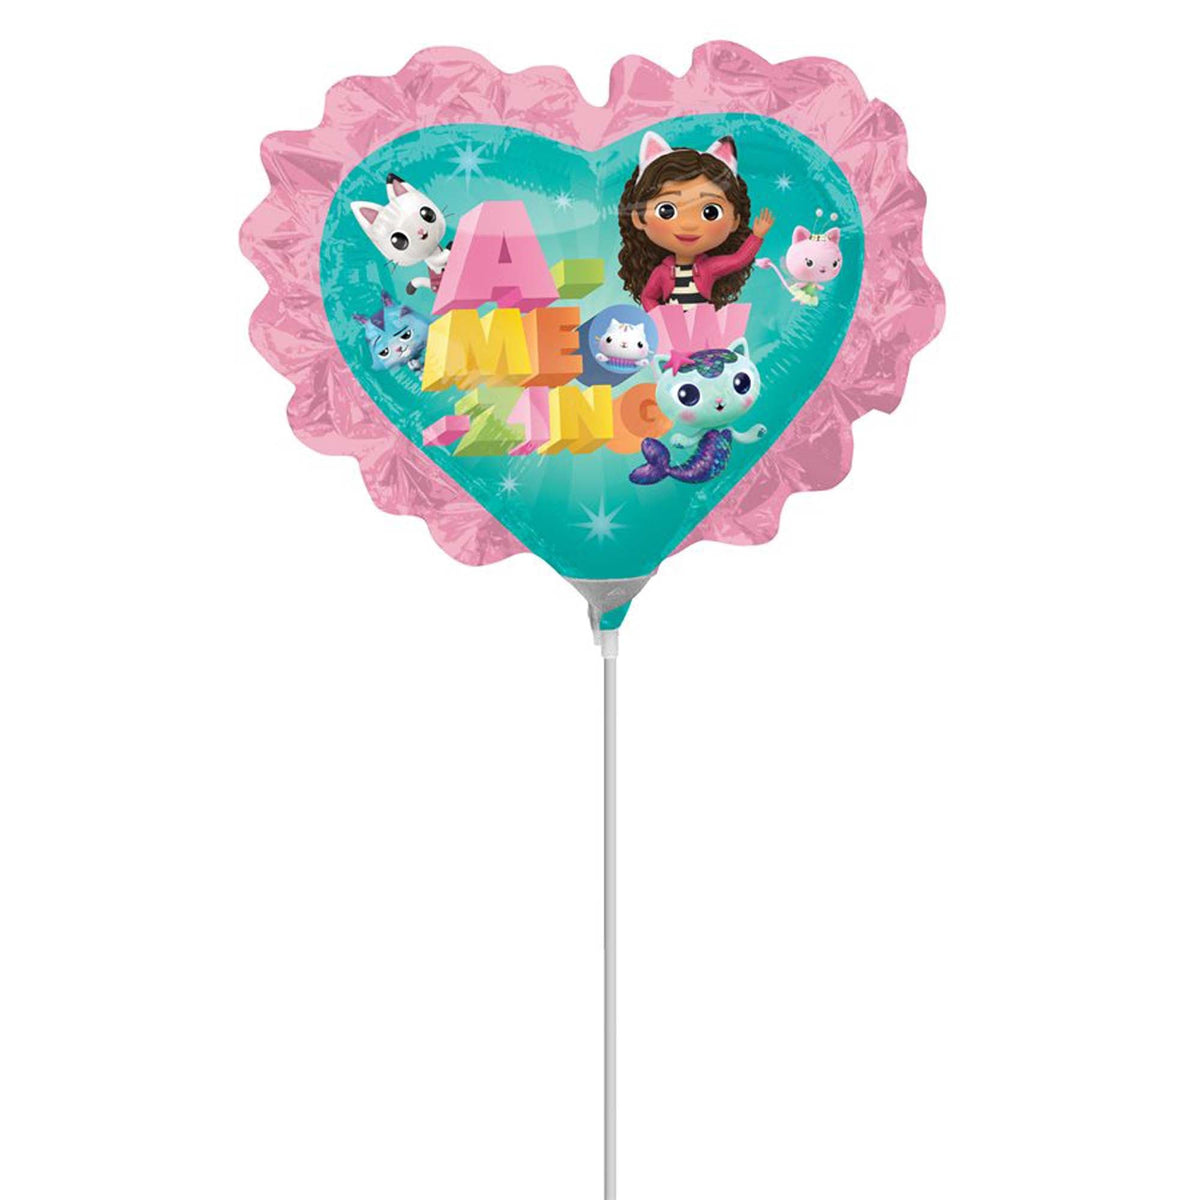 LE GROUPE BLC INTL INC Balloons Gabby's Dollhouse Air-Filled Balloon, 14 Inches, 1 Count